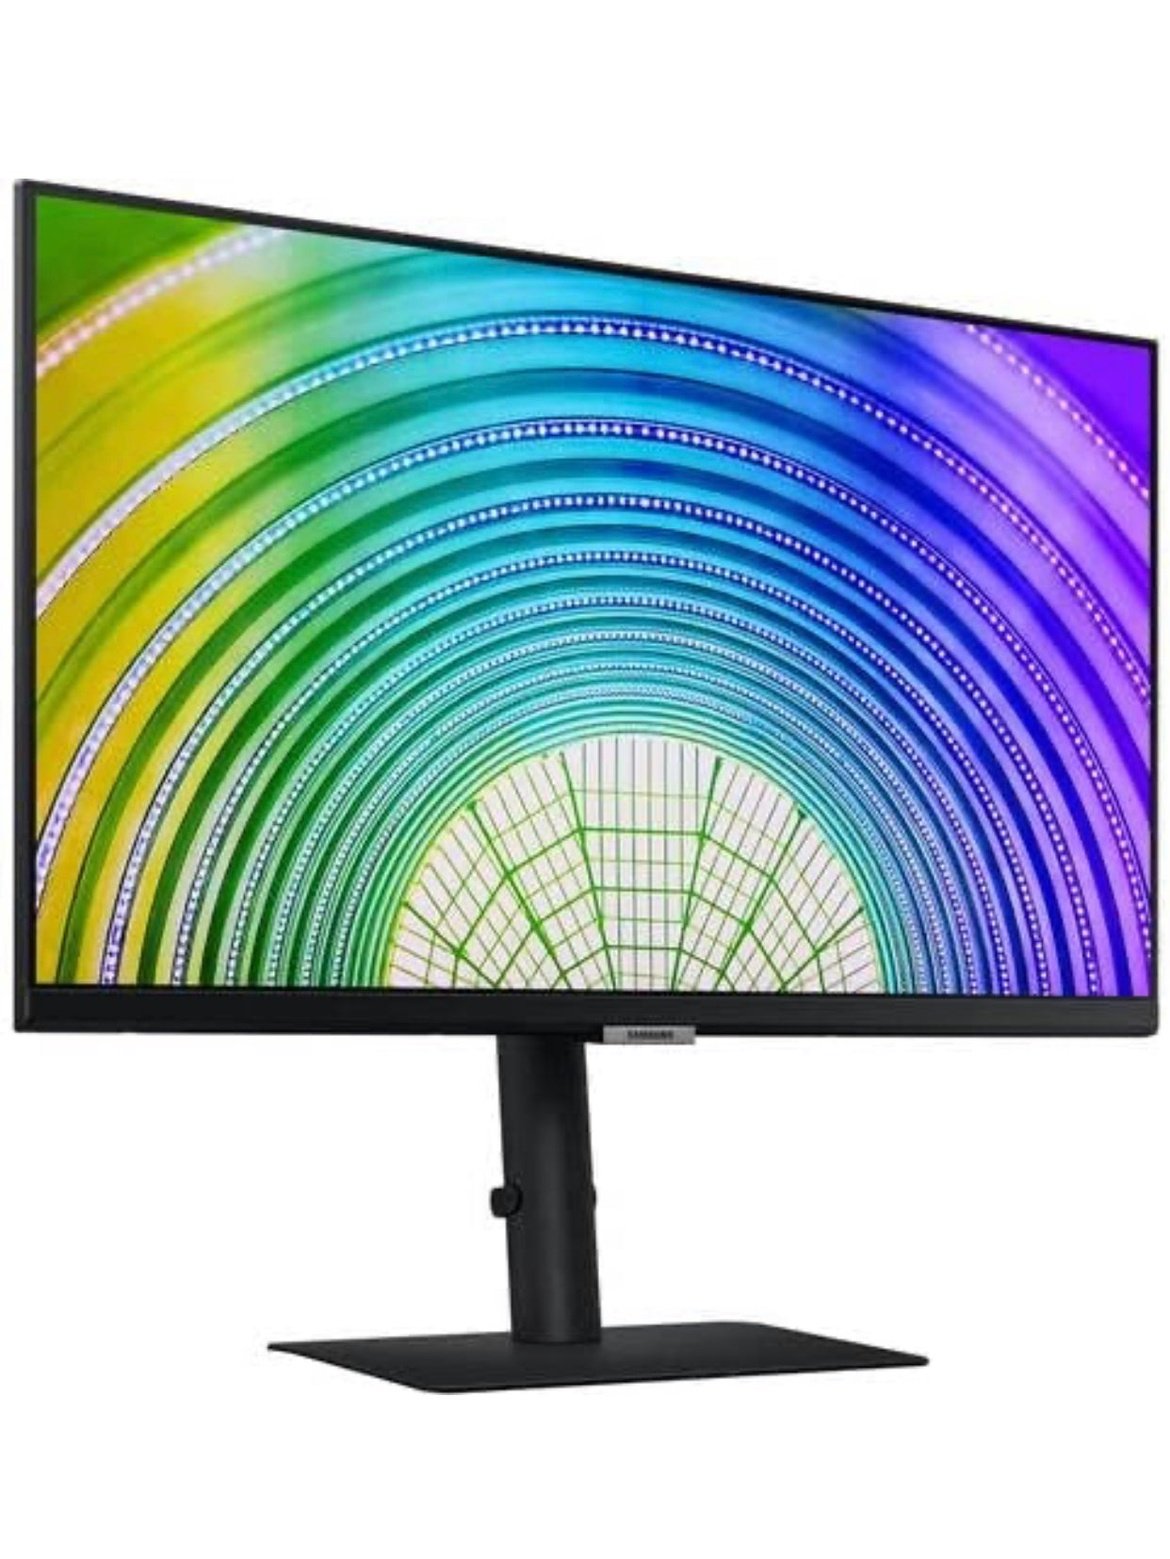 Samsung LS24A600UCNX S24A600UCN 24-Inch Widescreen IPS LCD Monitor with USB-C - 2560 x 1440-16:9-1000:1-5 ms - 75 Hz - 300 cd/m2 - FreeSync - Black